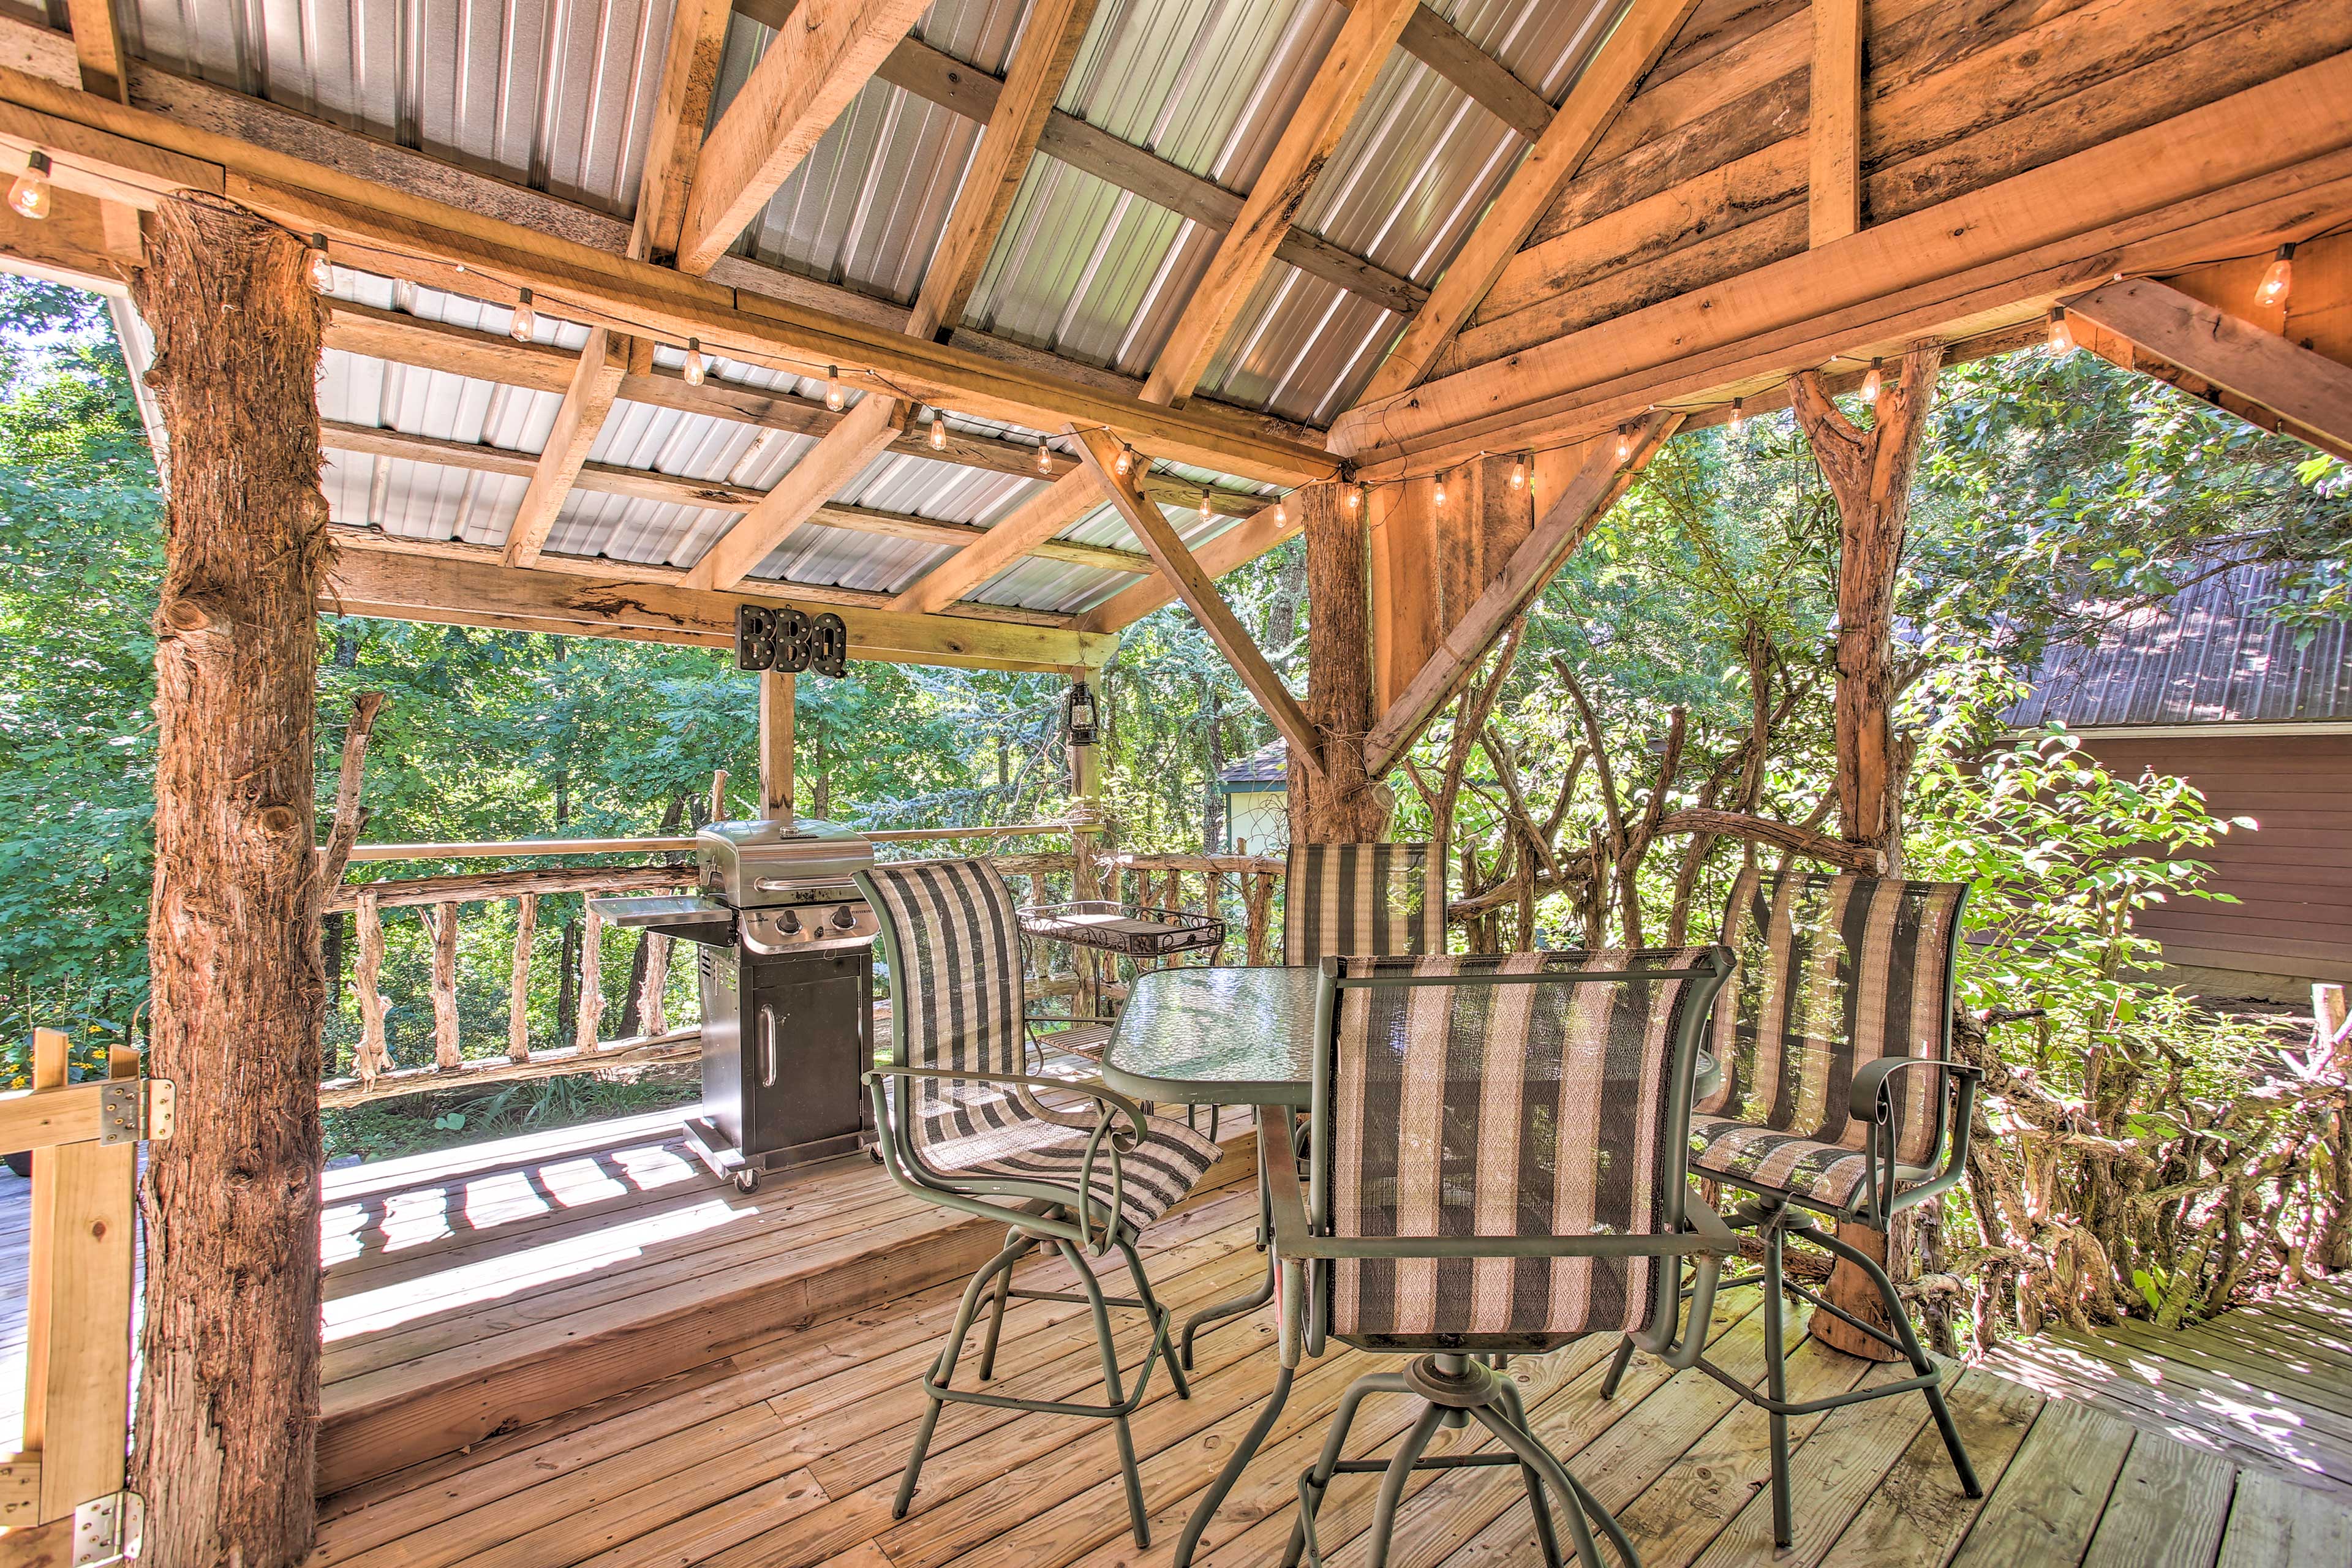 Rustic & Secluded Retreat w/ Deck on 2 Acres!